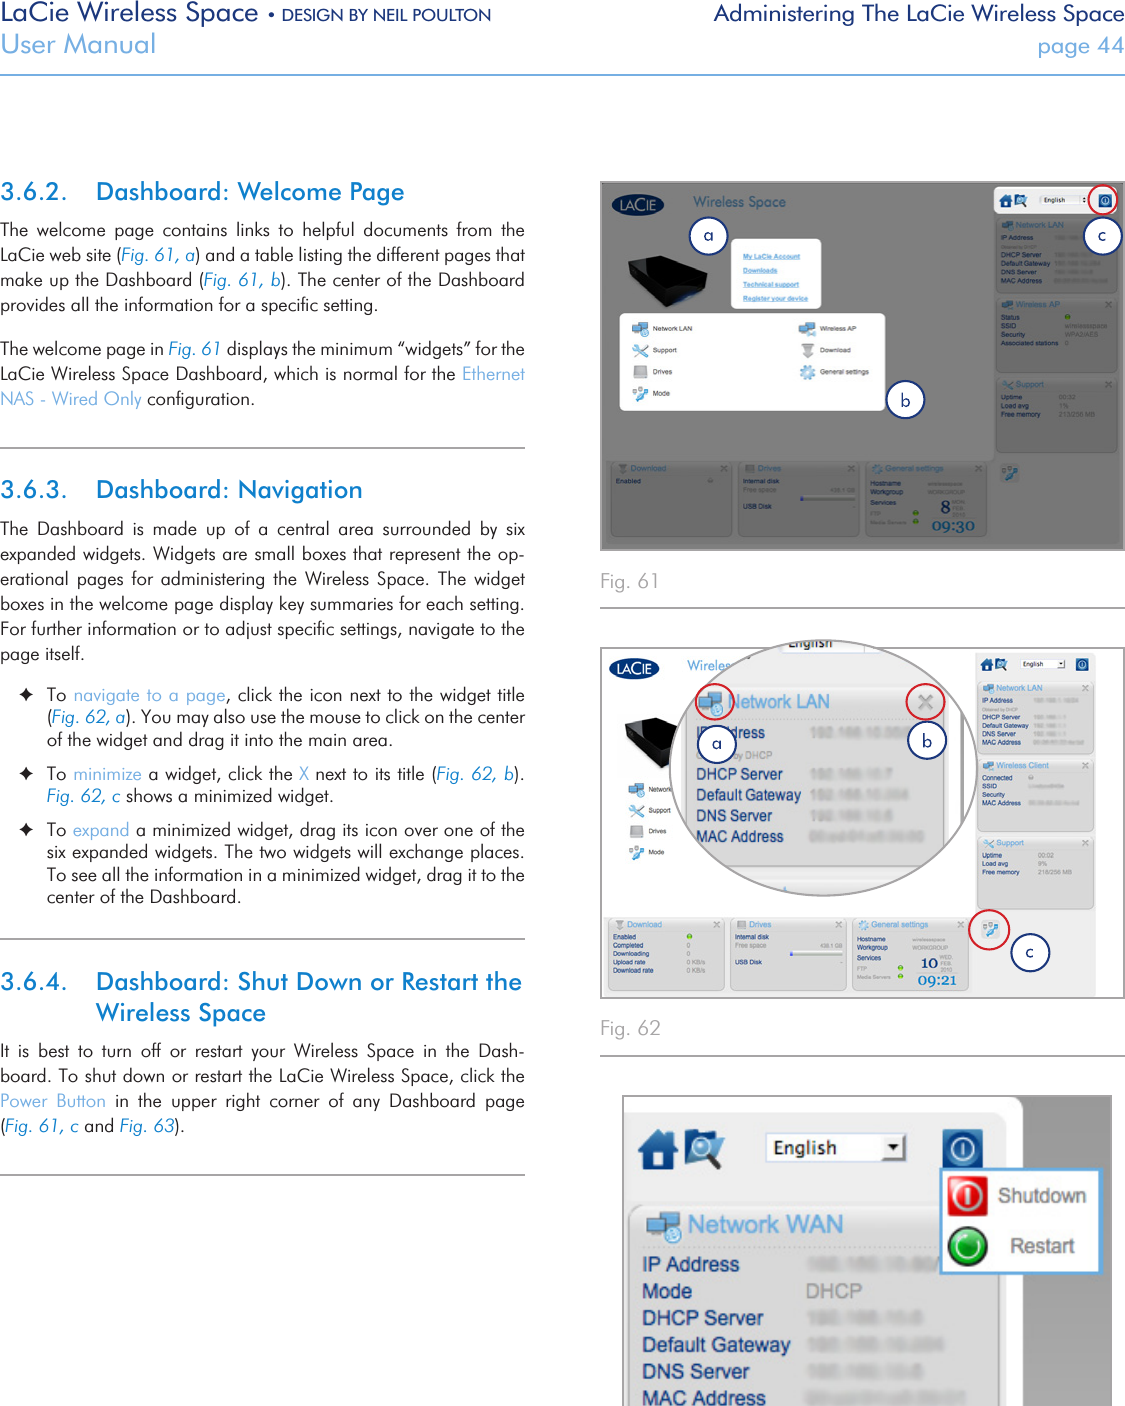 LaCie Wireless Space • DESIGN BY NEIL POULTON Administering The LaCie Wireless SpaceUser Manual  page 443.6.2.  Dashboard: Welcome PageThe  welcome  page  contains  links  to  helpful  documents  from  the LaCie web site (Fig. 61, a) and a table listing the different pages that make up the Dashboard (Fig. 61, b). The center of the Dashboard provides all the information for a speciﬁc setting.The welcome page in Fig. 61 displays the minimum “widgets” for the LaCie Wireless Space Dashboard, which is normal for the Ethernet NAS - Wired Only conﬁguration. 3.6.3.  Dashboard: NavigationThe  Dashboard  is  made  up  of  a  central  area  surrounded  by  six expanded widgets. Widgets are small boxes that represent the op-erational  pages  for administering  the  Wireless Space.  The  widget boxes in the welcome page display key summaries for each setting. For further information or to adjust speciﬁc settings, navigate to the page itself. ✦To navigate to a page, click the icon next to the widget title (Fig. 62, a). You may also use the mouse to click on the center of the widget and drag it into the main area. ✦To minimize a widget, click the X next to its title (Fig. 62, b). Fig. 62, c shows a minimized widget. ✦To expand a minimized widget, drag its icon over one of the six expanded widgets. The two widgets will exchange places. To see all the information in a minimized widget, drag it to the center of the Dashboard.3.6.4.  Dashboard: Shut Down or Restart the Wireless SpaceIt  is  best  to  turn  off  or  restart  your  Wireless  Space  in  the  Dash-board. To shut down or restart the LaCie Wireless Space, click the Power  Button  in  the  upper  right  corner  of  any  Dashboard  page                     (Fig. 61, c and Fig. 63).   Fig. 61 Fig. 62 Fig. 63 